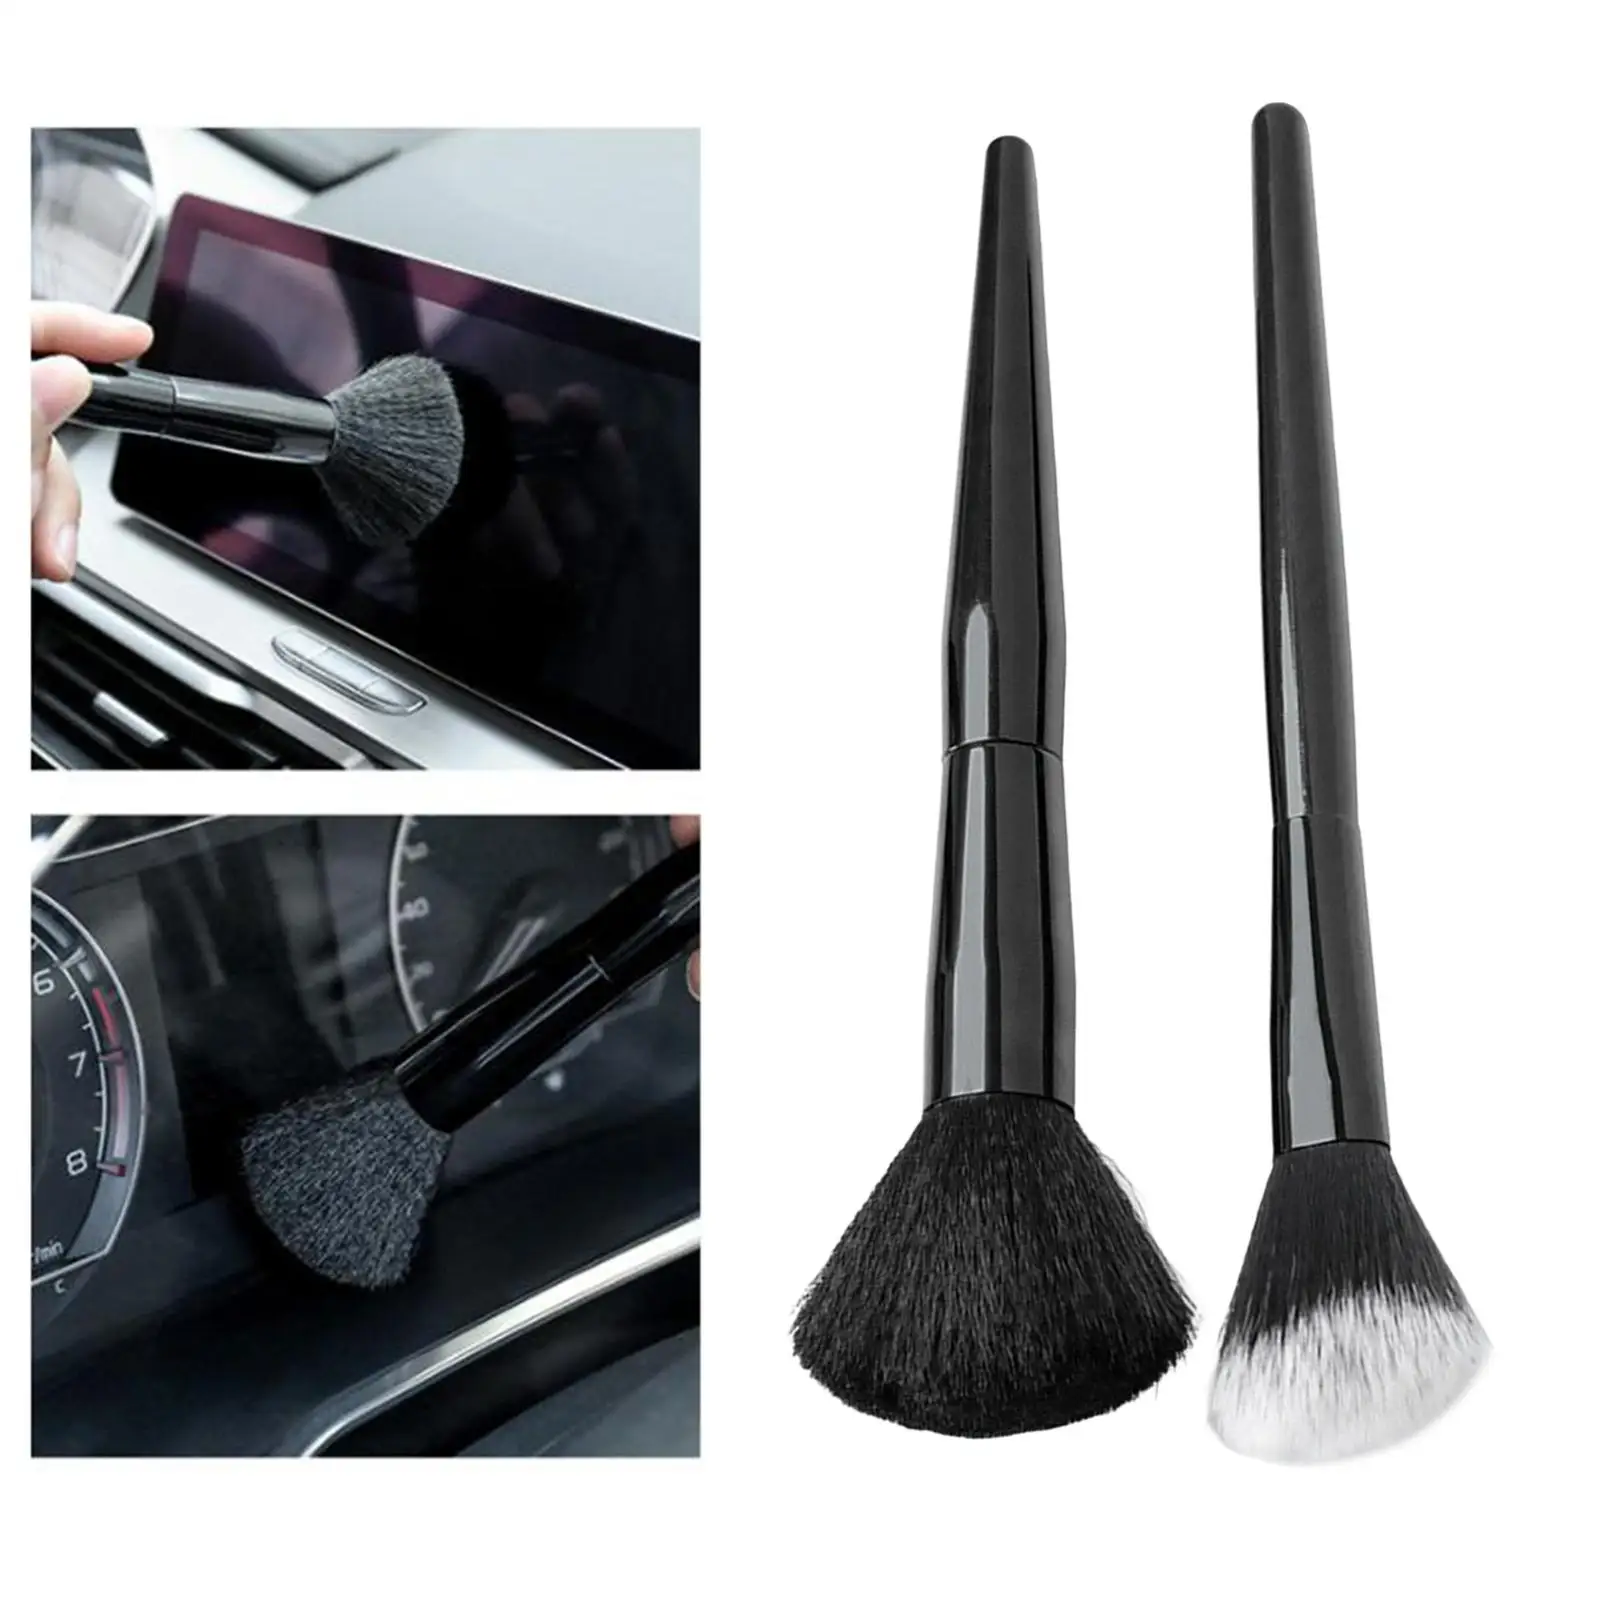 2 Pieces Car Detailing Brushes, Wash Cleaning Supplies Detail Cleaning